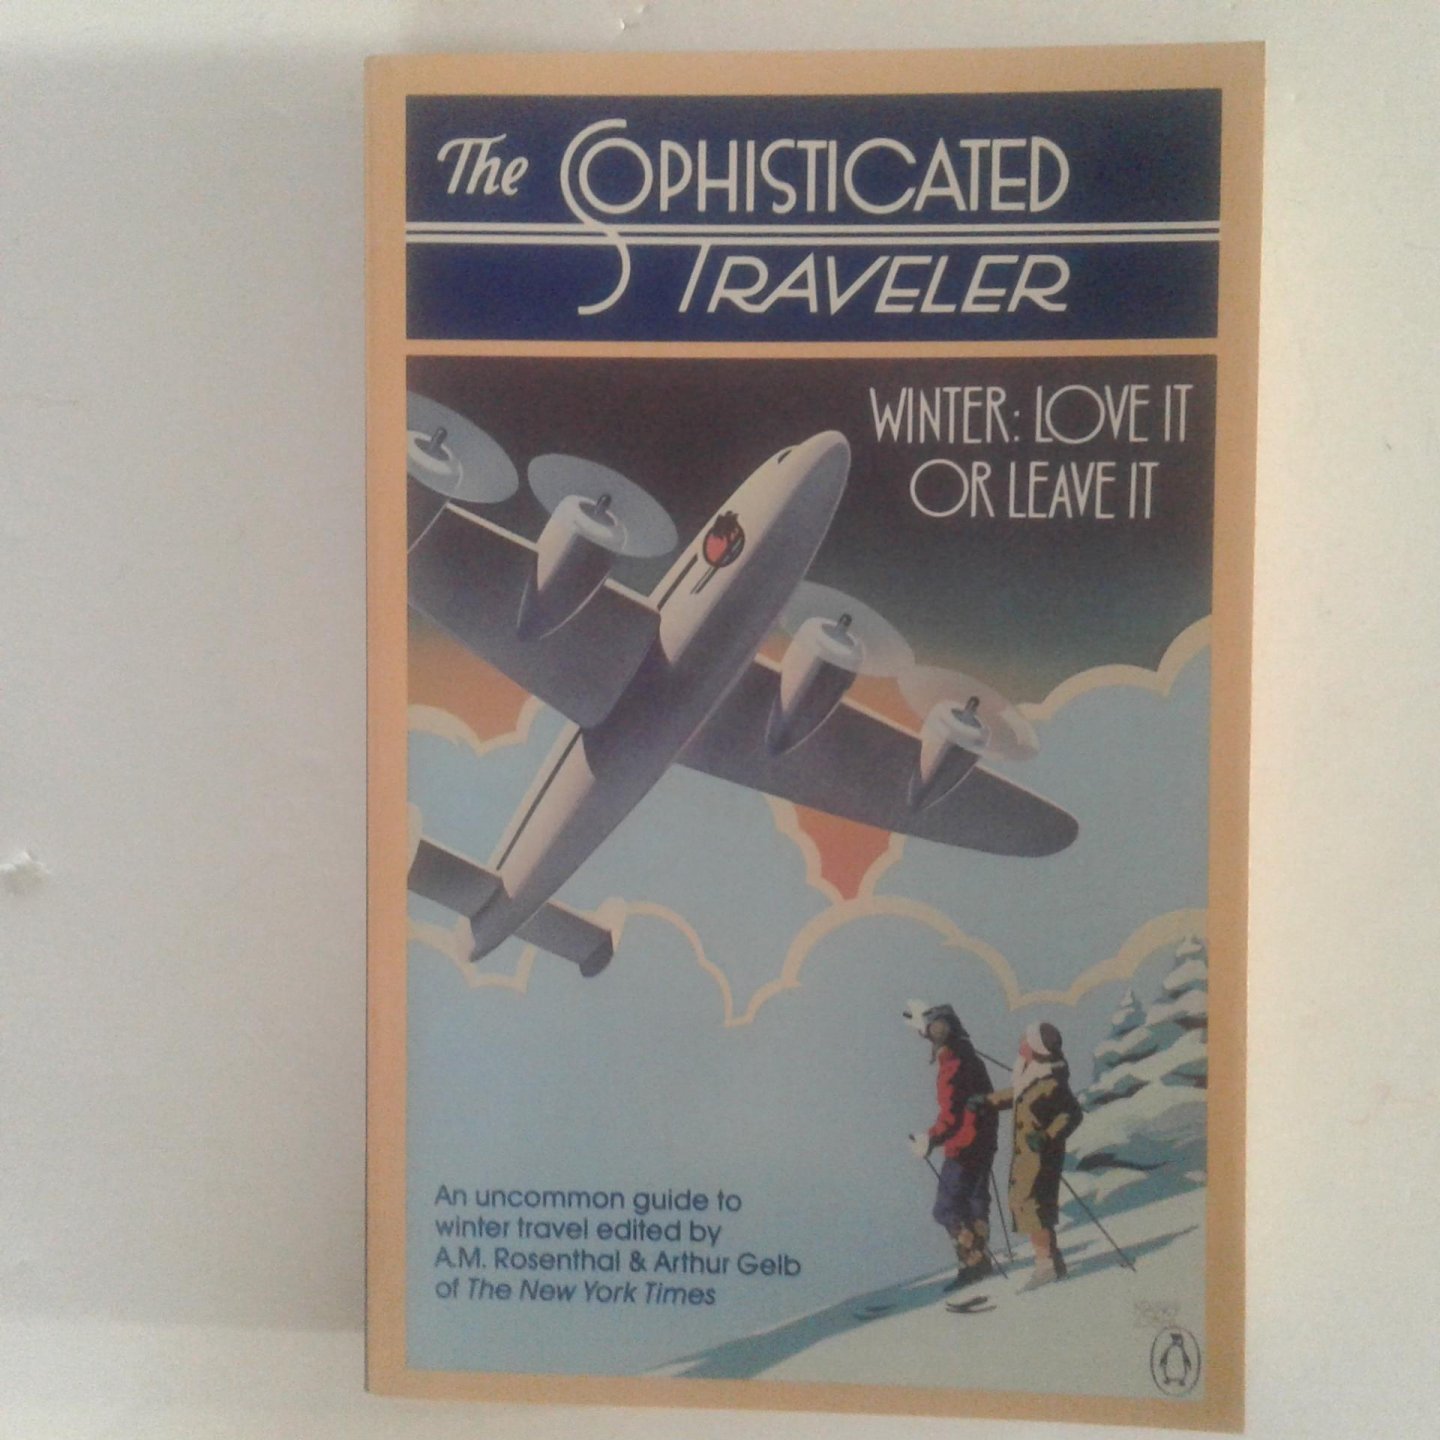 Rosenthal, A.M. ; Gelb, Arthur - The Sophisticated Traveler ; Winter, love it or leave it